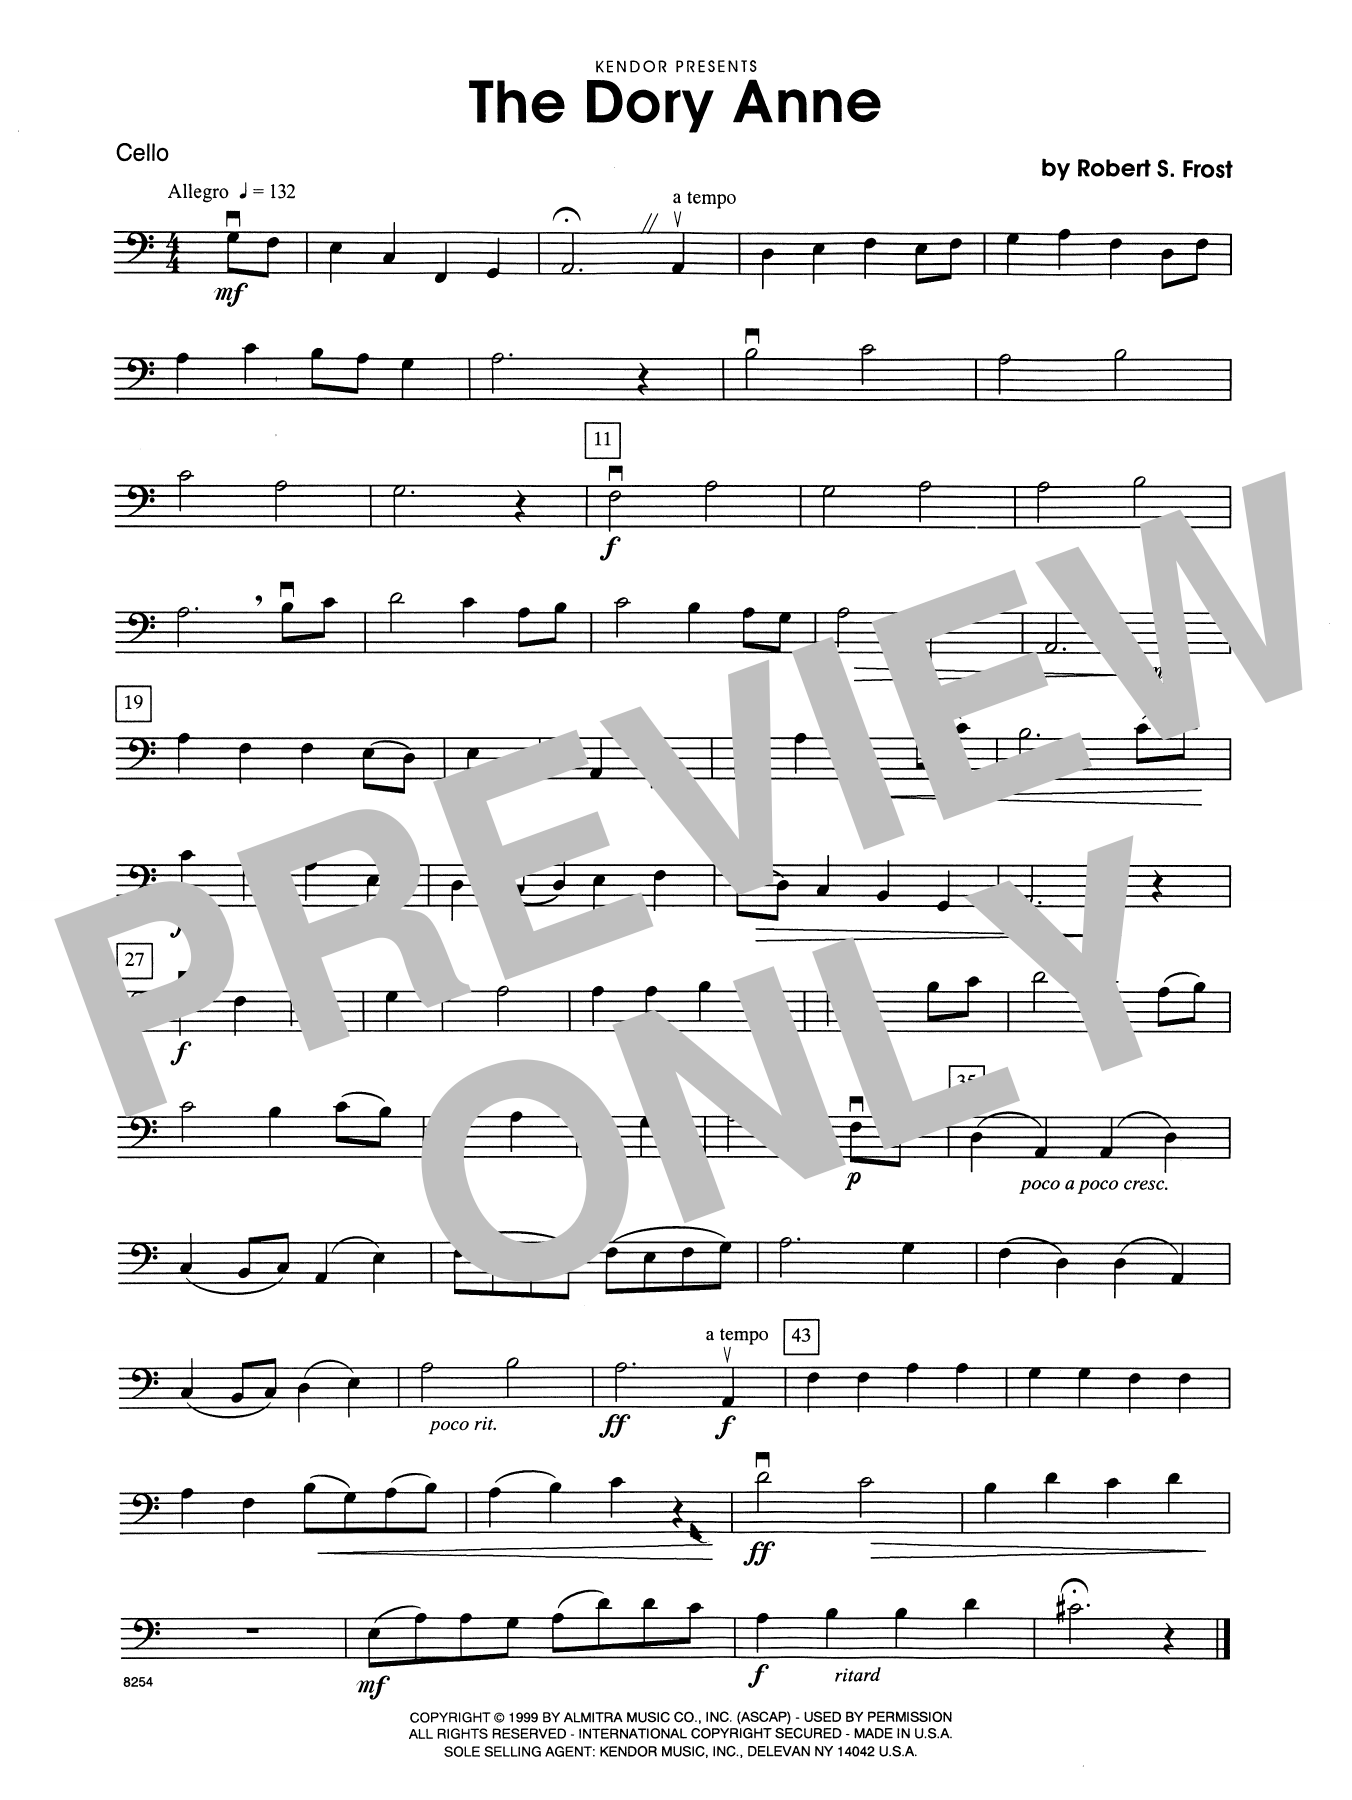 Download Robert S. Frost The Dory Anne - Cello Sheet Music